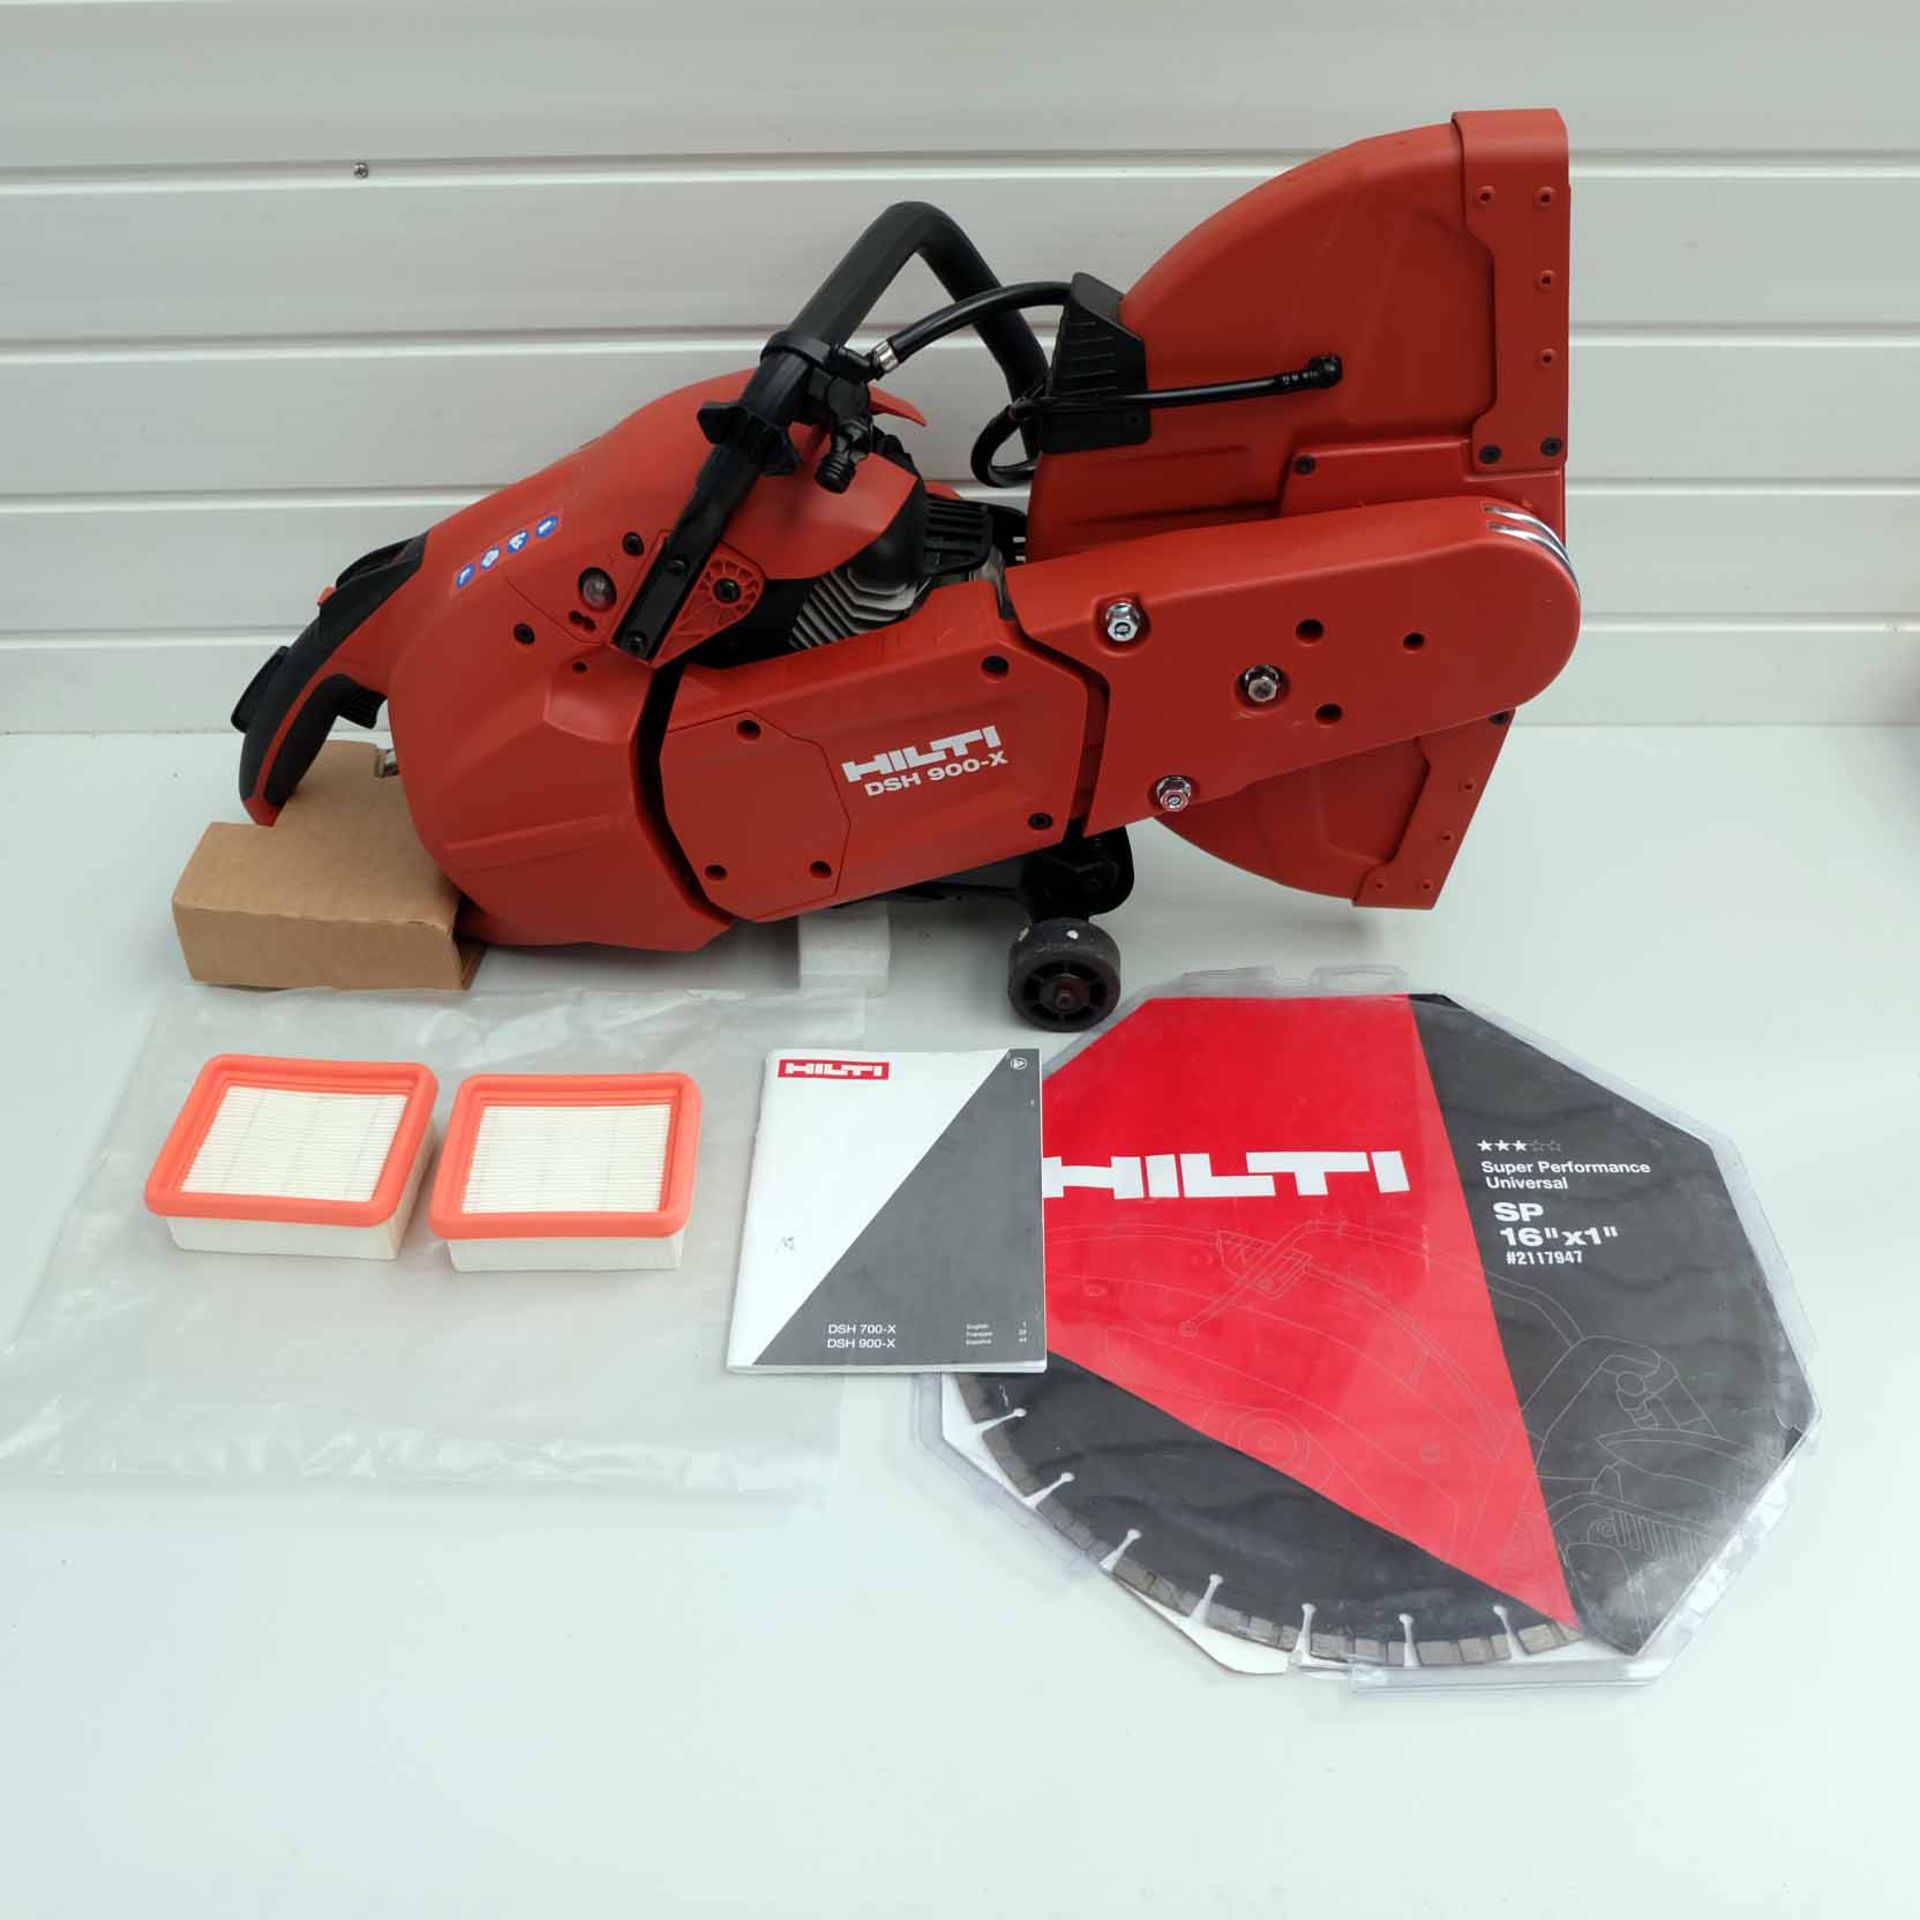 Hilti Hand Held Gas Saw. Model DSH 900-X 16". Complete With SP-16"x1" Blade. Easy Start Auto-Choke S